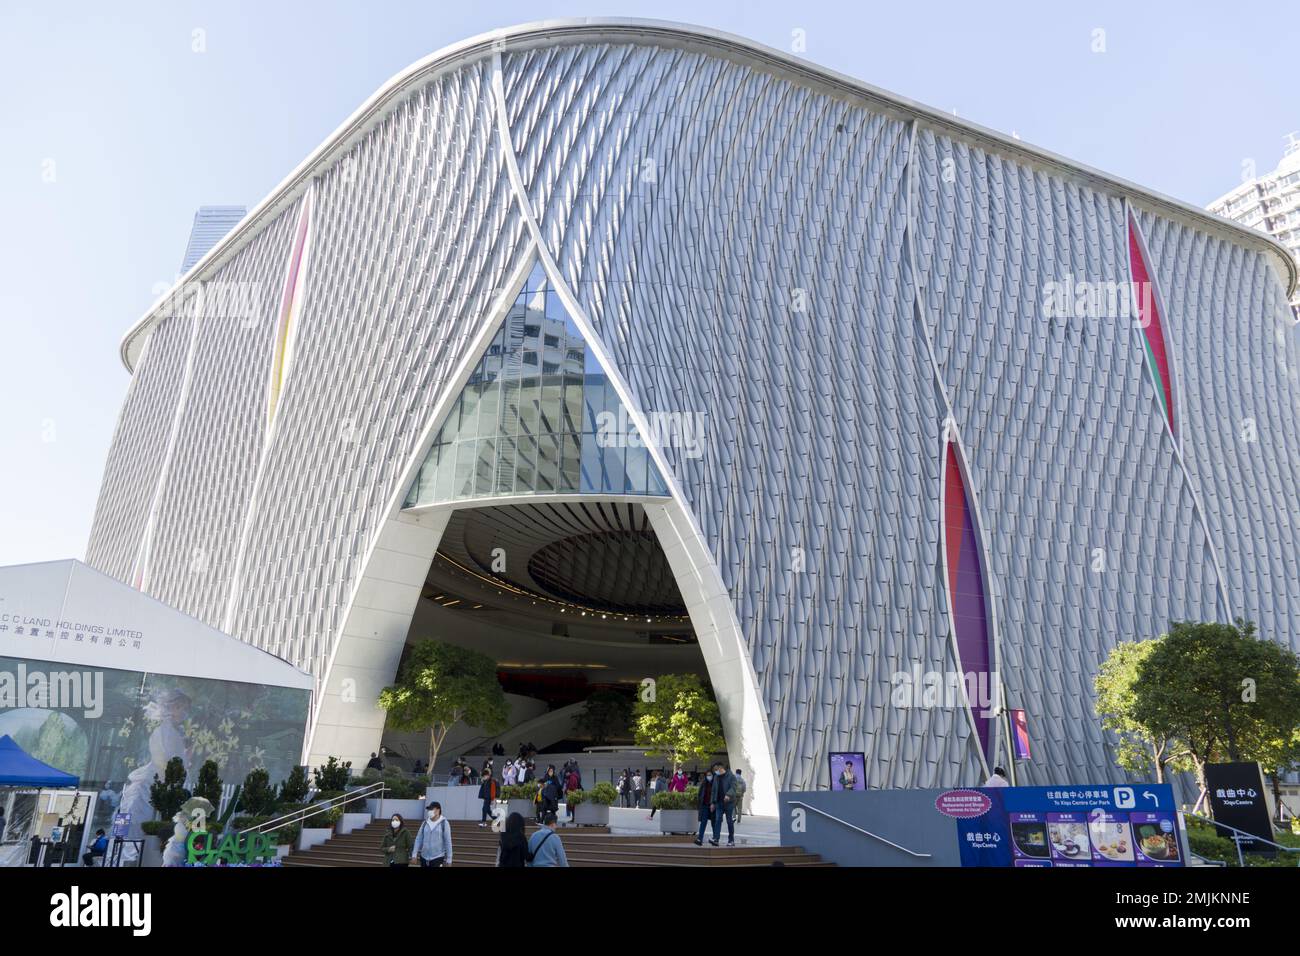 Xiqu Centre located in West Kowloon Cultural District. It is a purpose-built venue for Chinese opera performances. Stock Photo